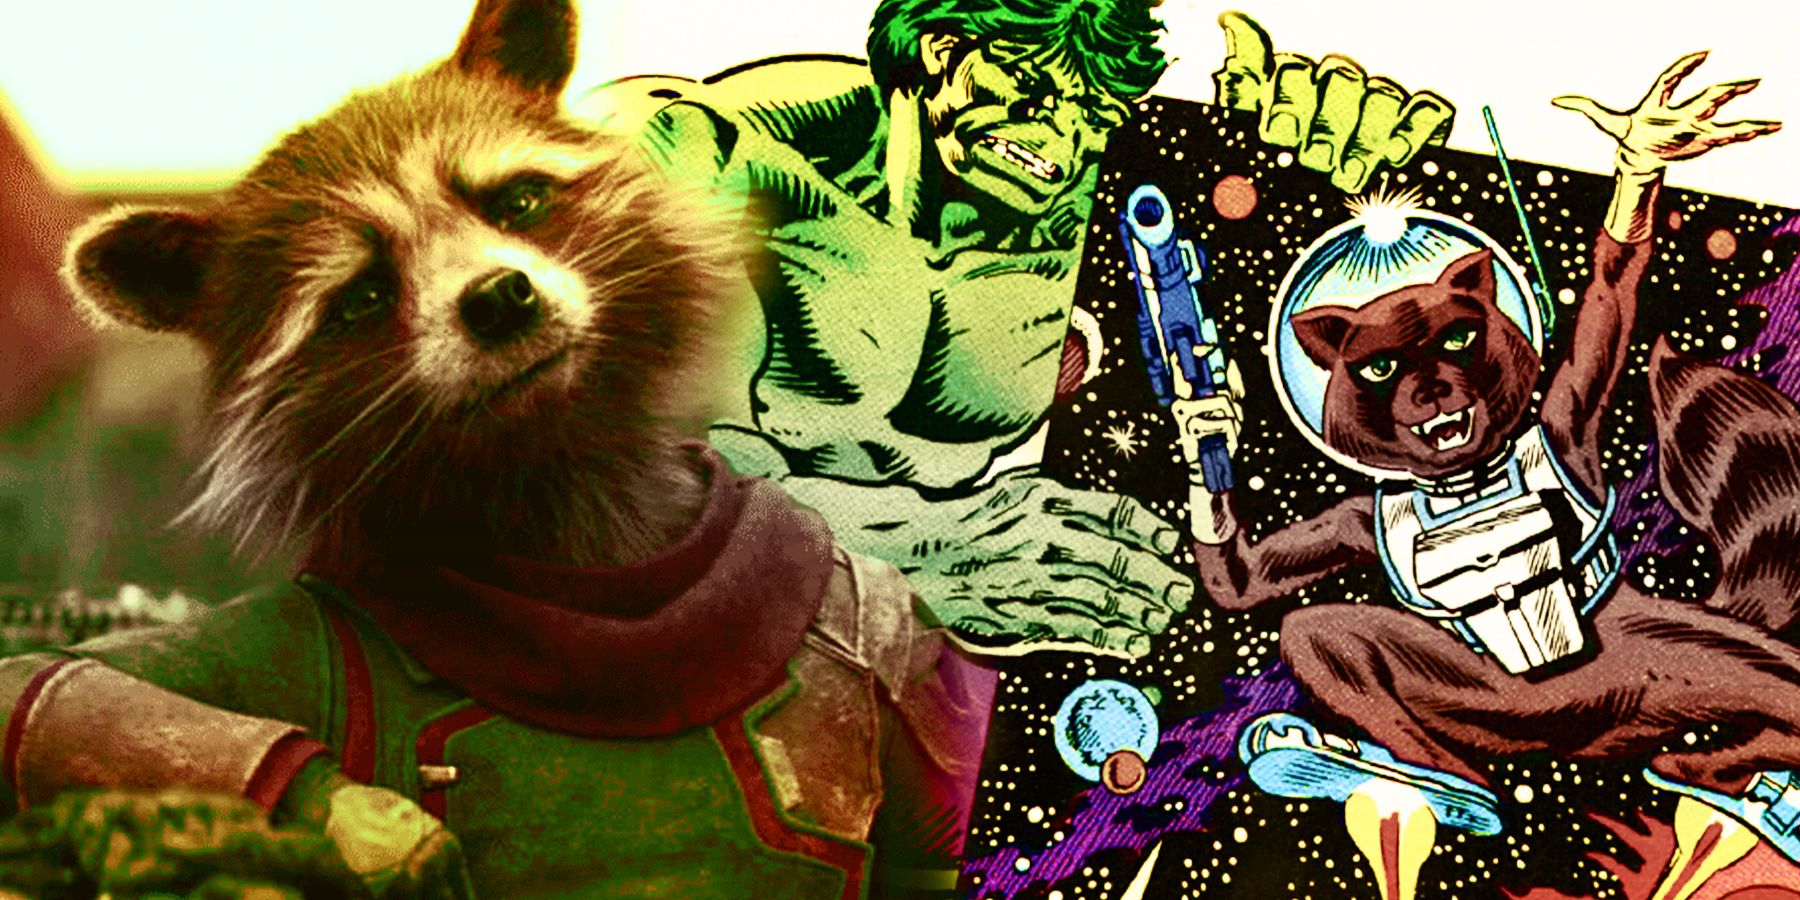 Rocket Raccoon from the MCU and Hulk with Rocket Raccoon from Marvel comics